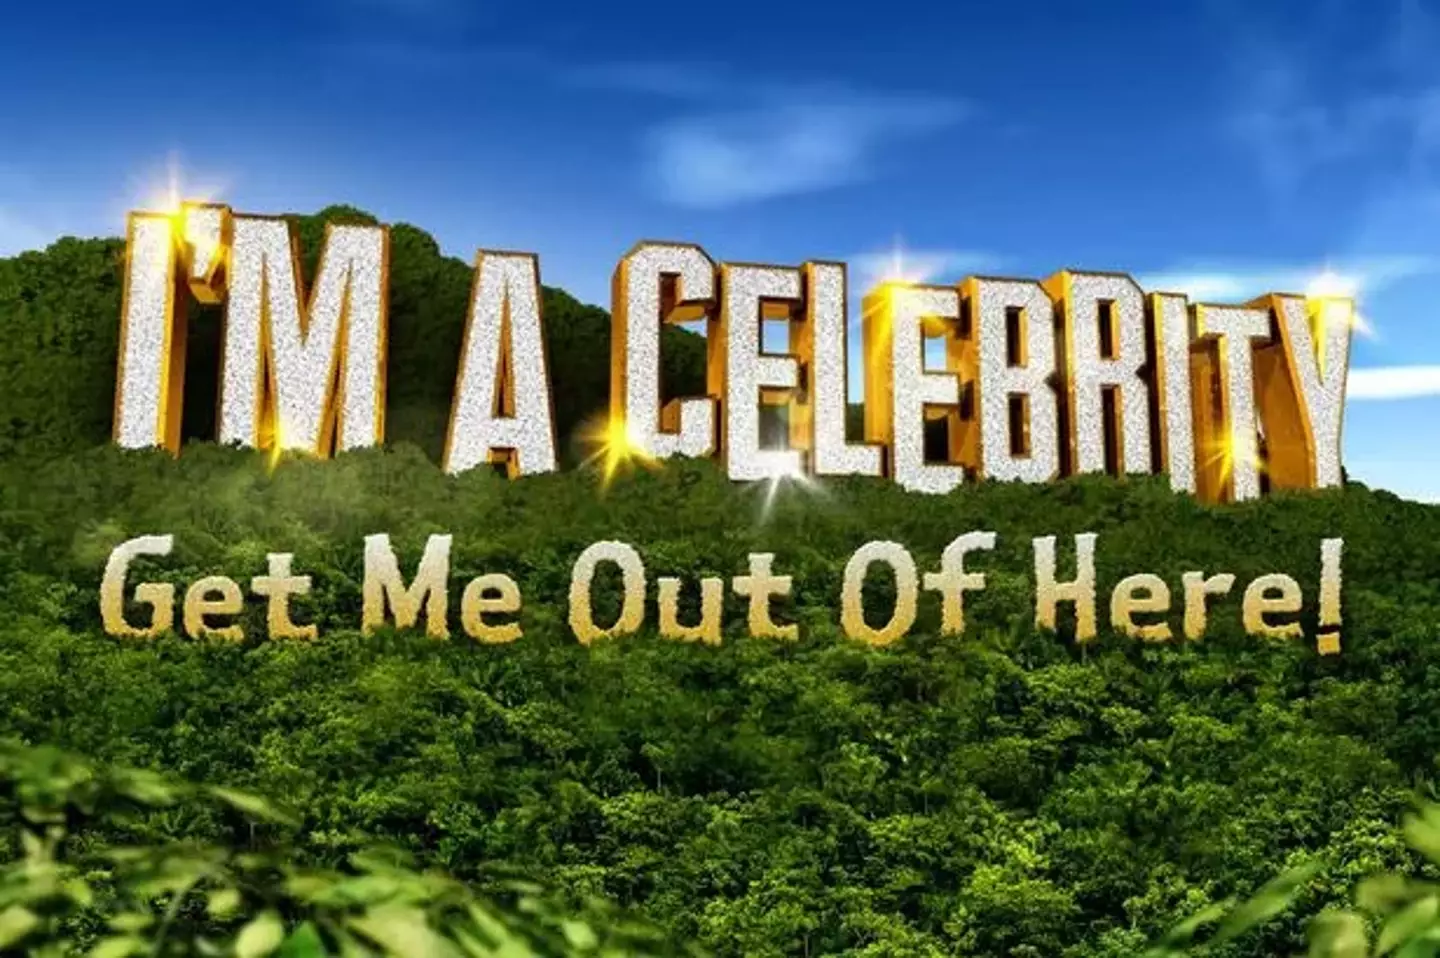 I'm A Celebrity... Get Me Out Of Here! is back and the predictions for who's going to win are already in.